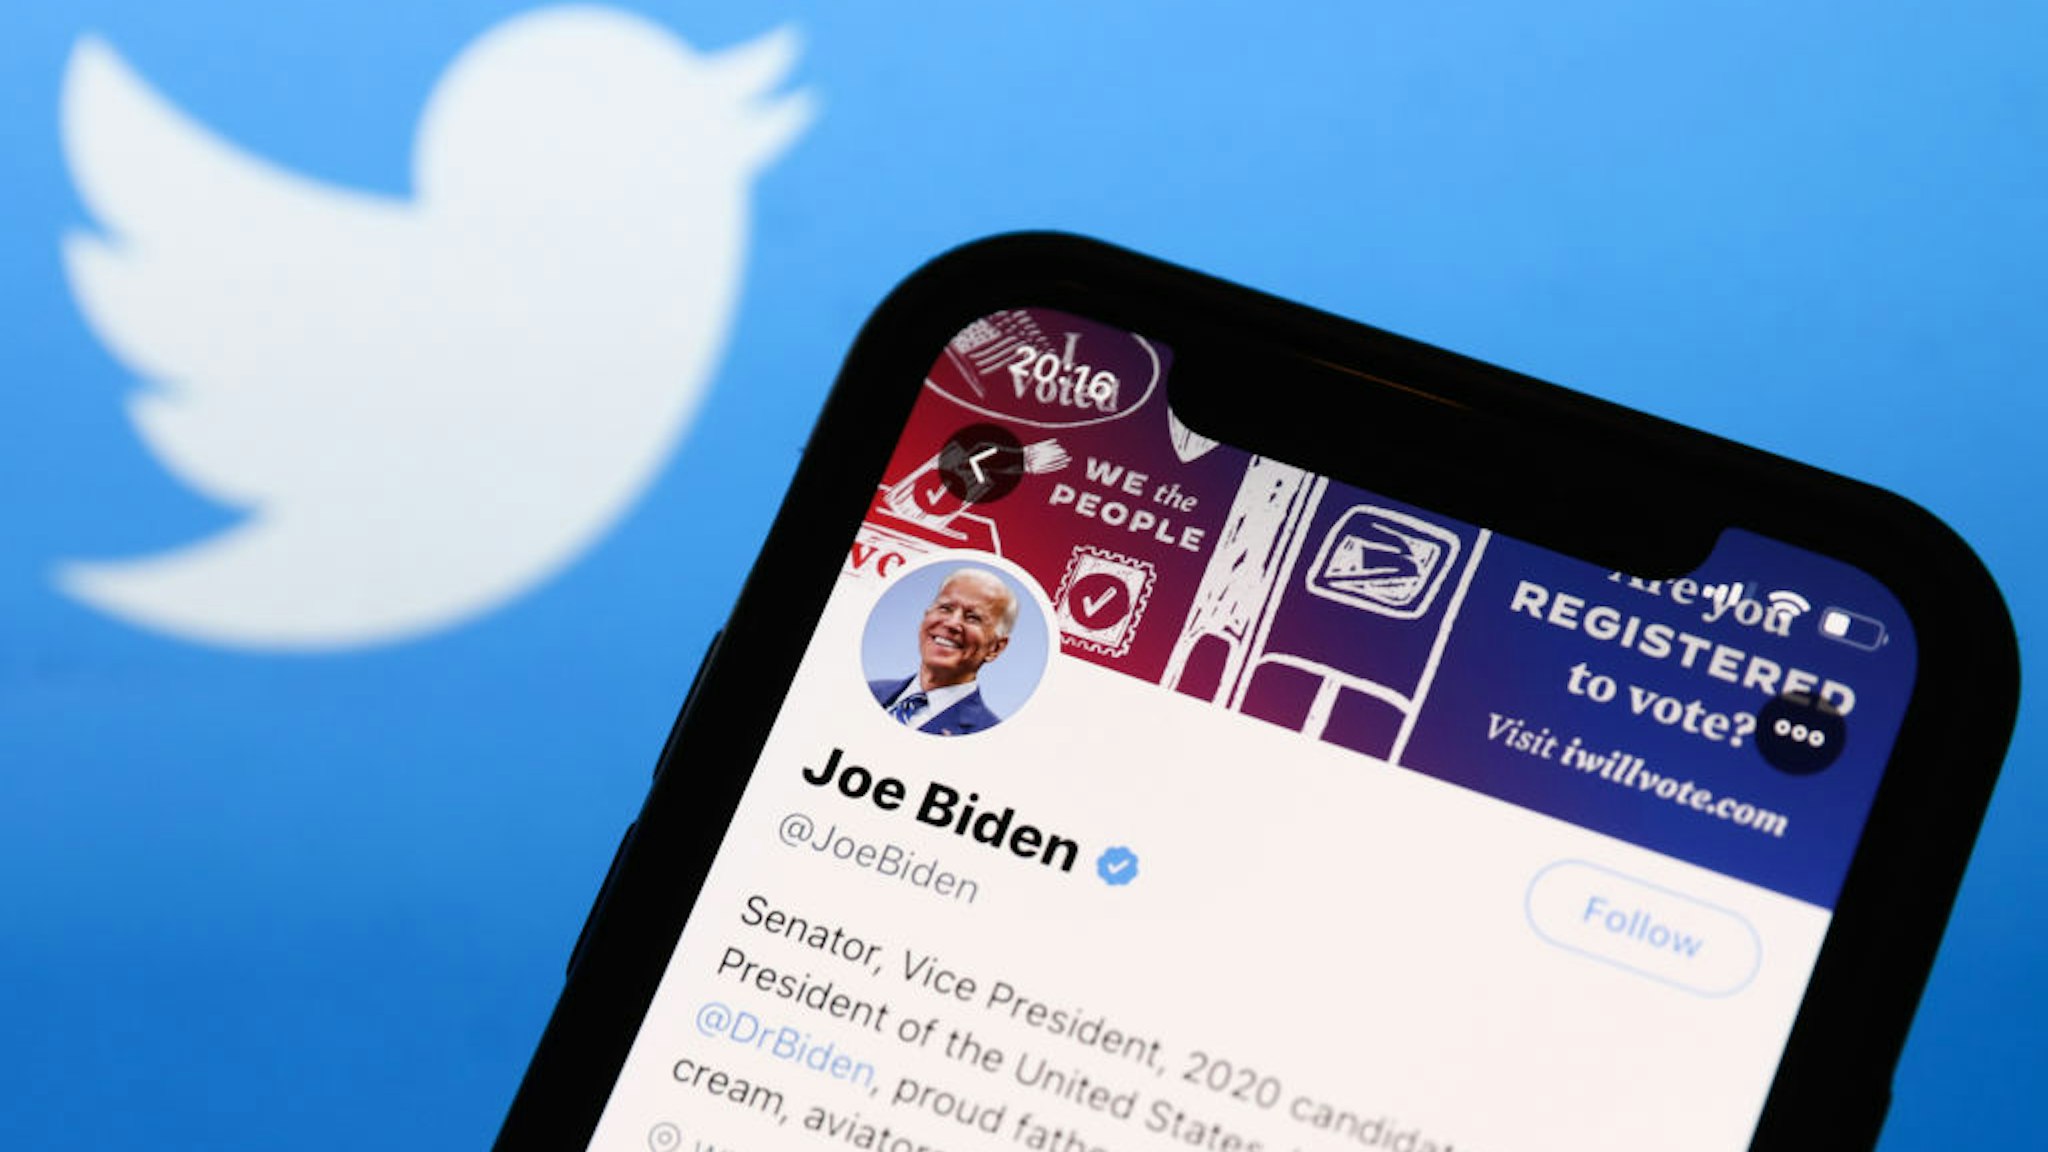 Twitter feed of candidate for President of the USA Joe Biden is seen displayed on a phone screen with Twitter logo in the background in this illustration photo taken on October 18, 2020. (Photo Illustration by Jakub Porzycki/NurPhoto via Getty Images)